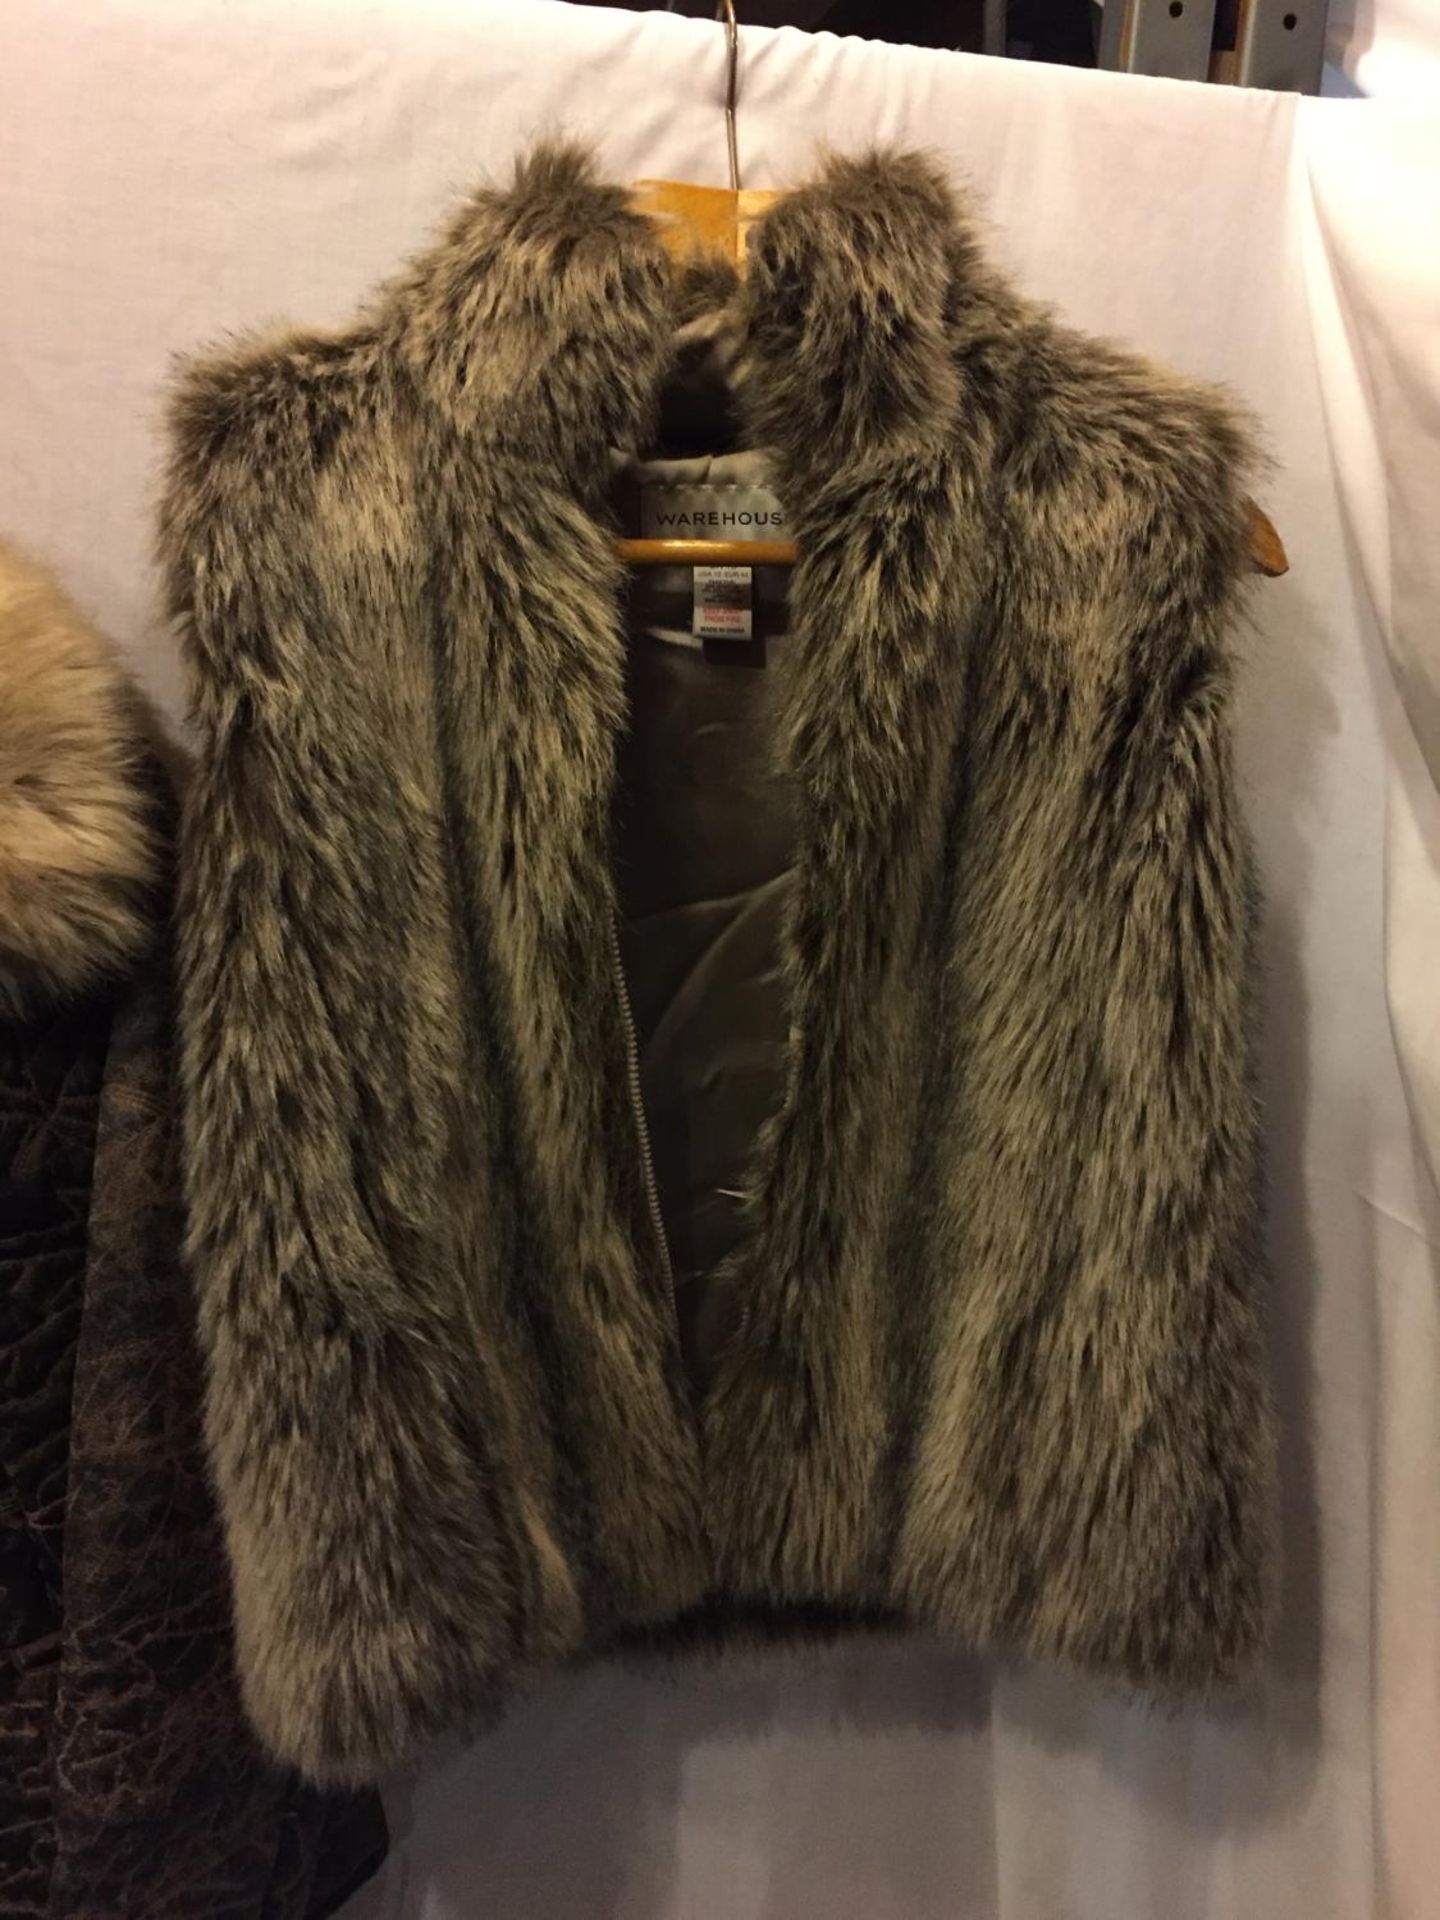 A LADIES LAKELAND COAT SIZE 14 AND A WAREHOUSE FAUX FUR GILET IN A SIZE 16 - Image 2 of 5